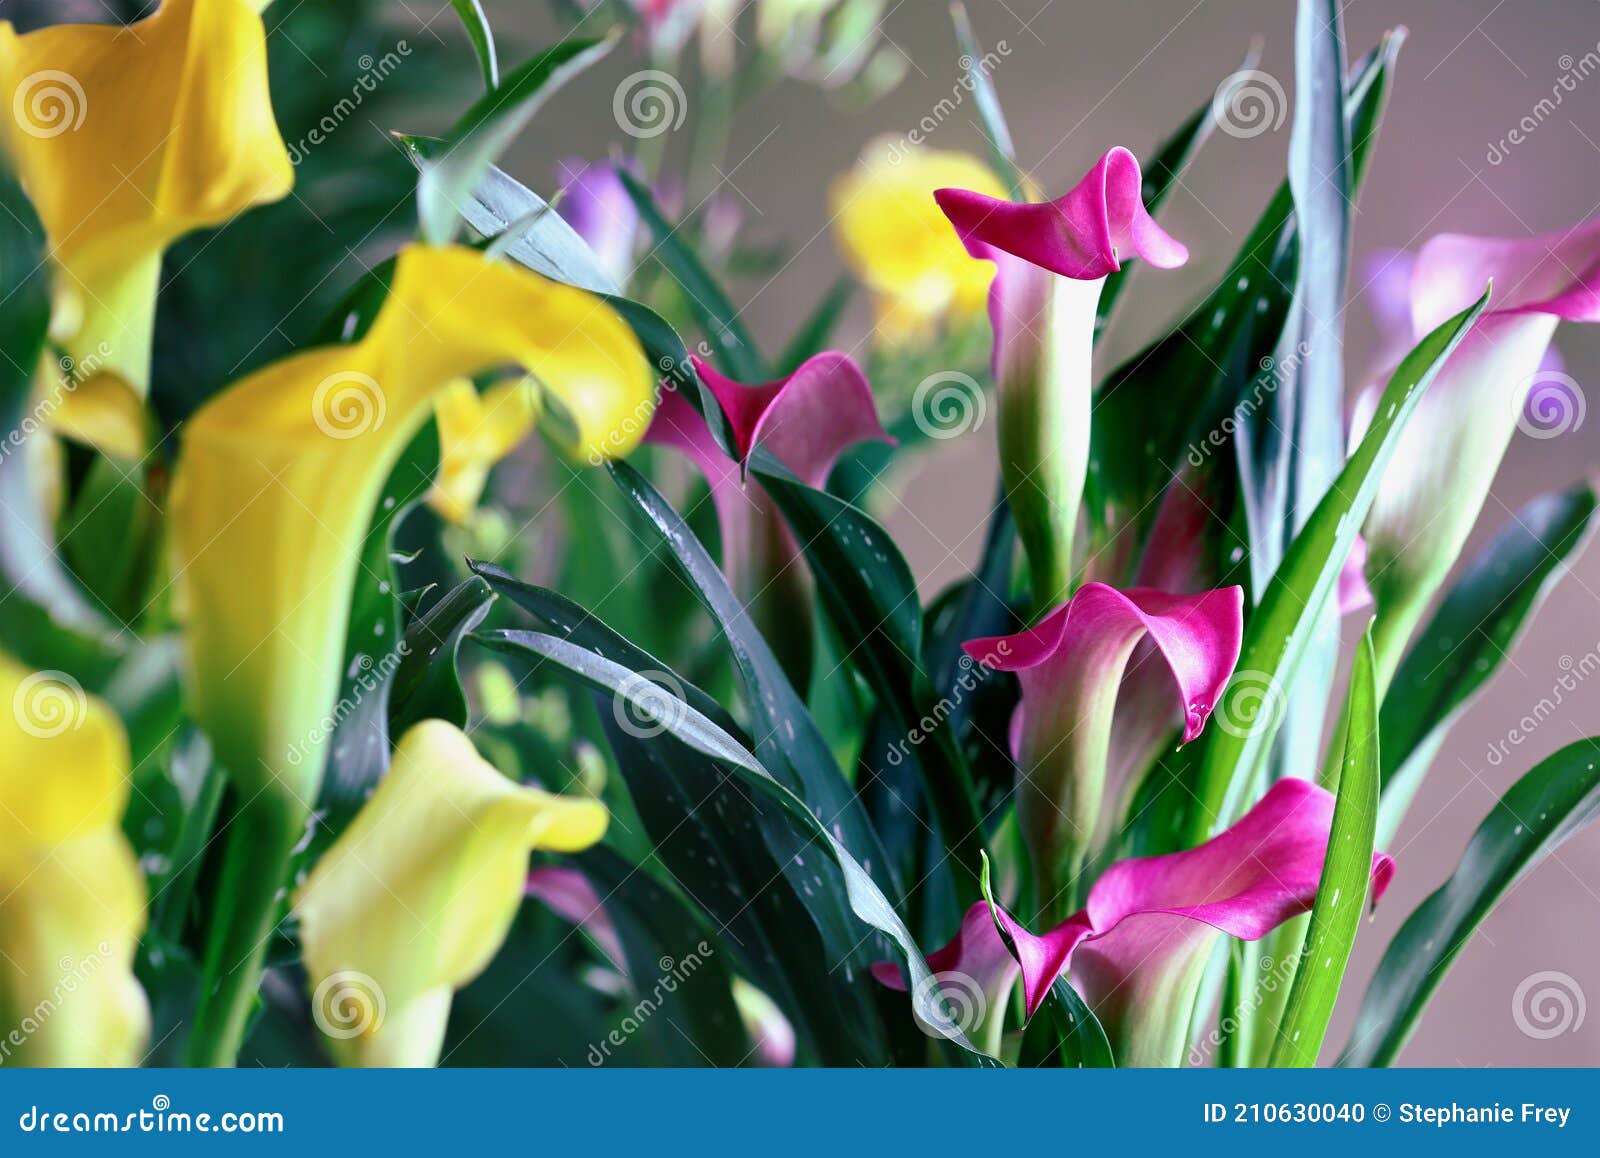 Abstract of Pink and Yellow Calla Lilies Growing Together Stock Photo ...